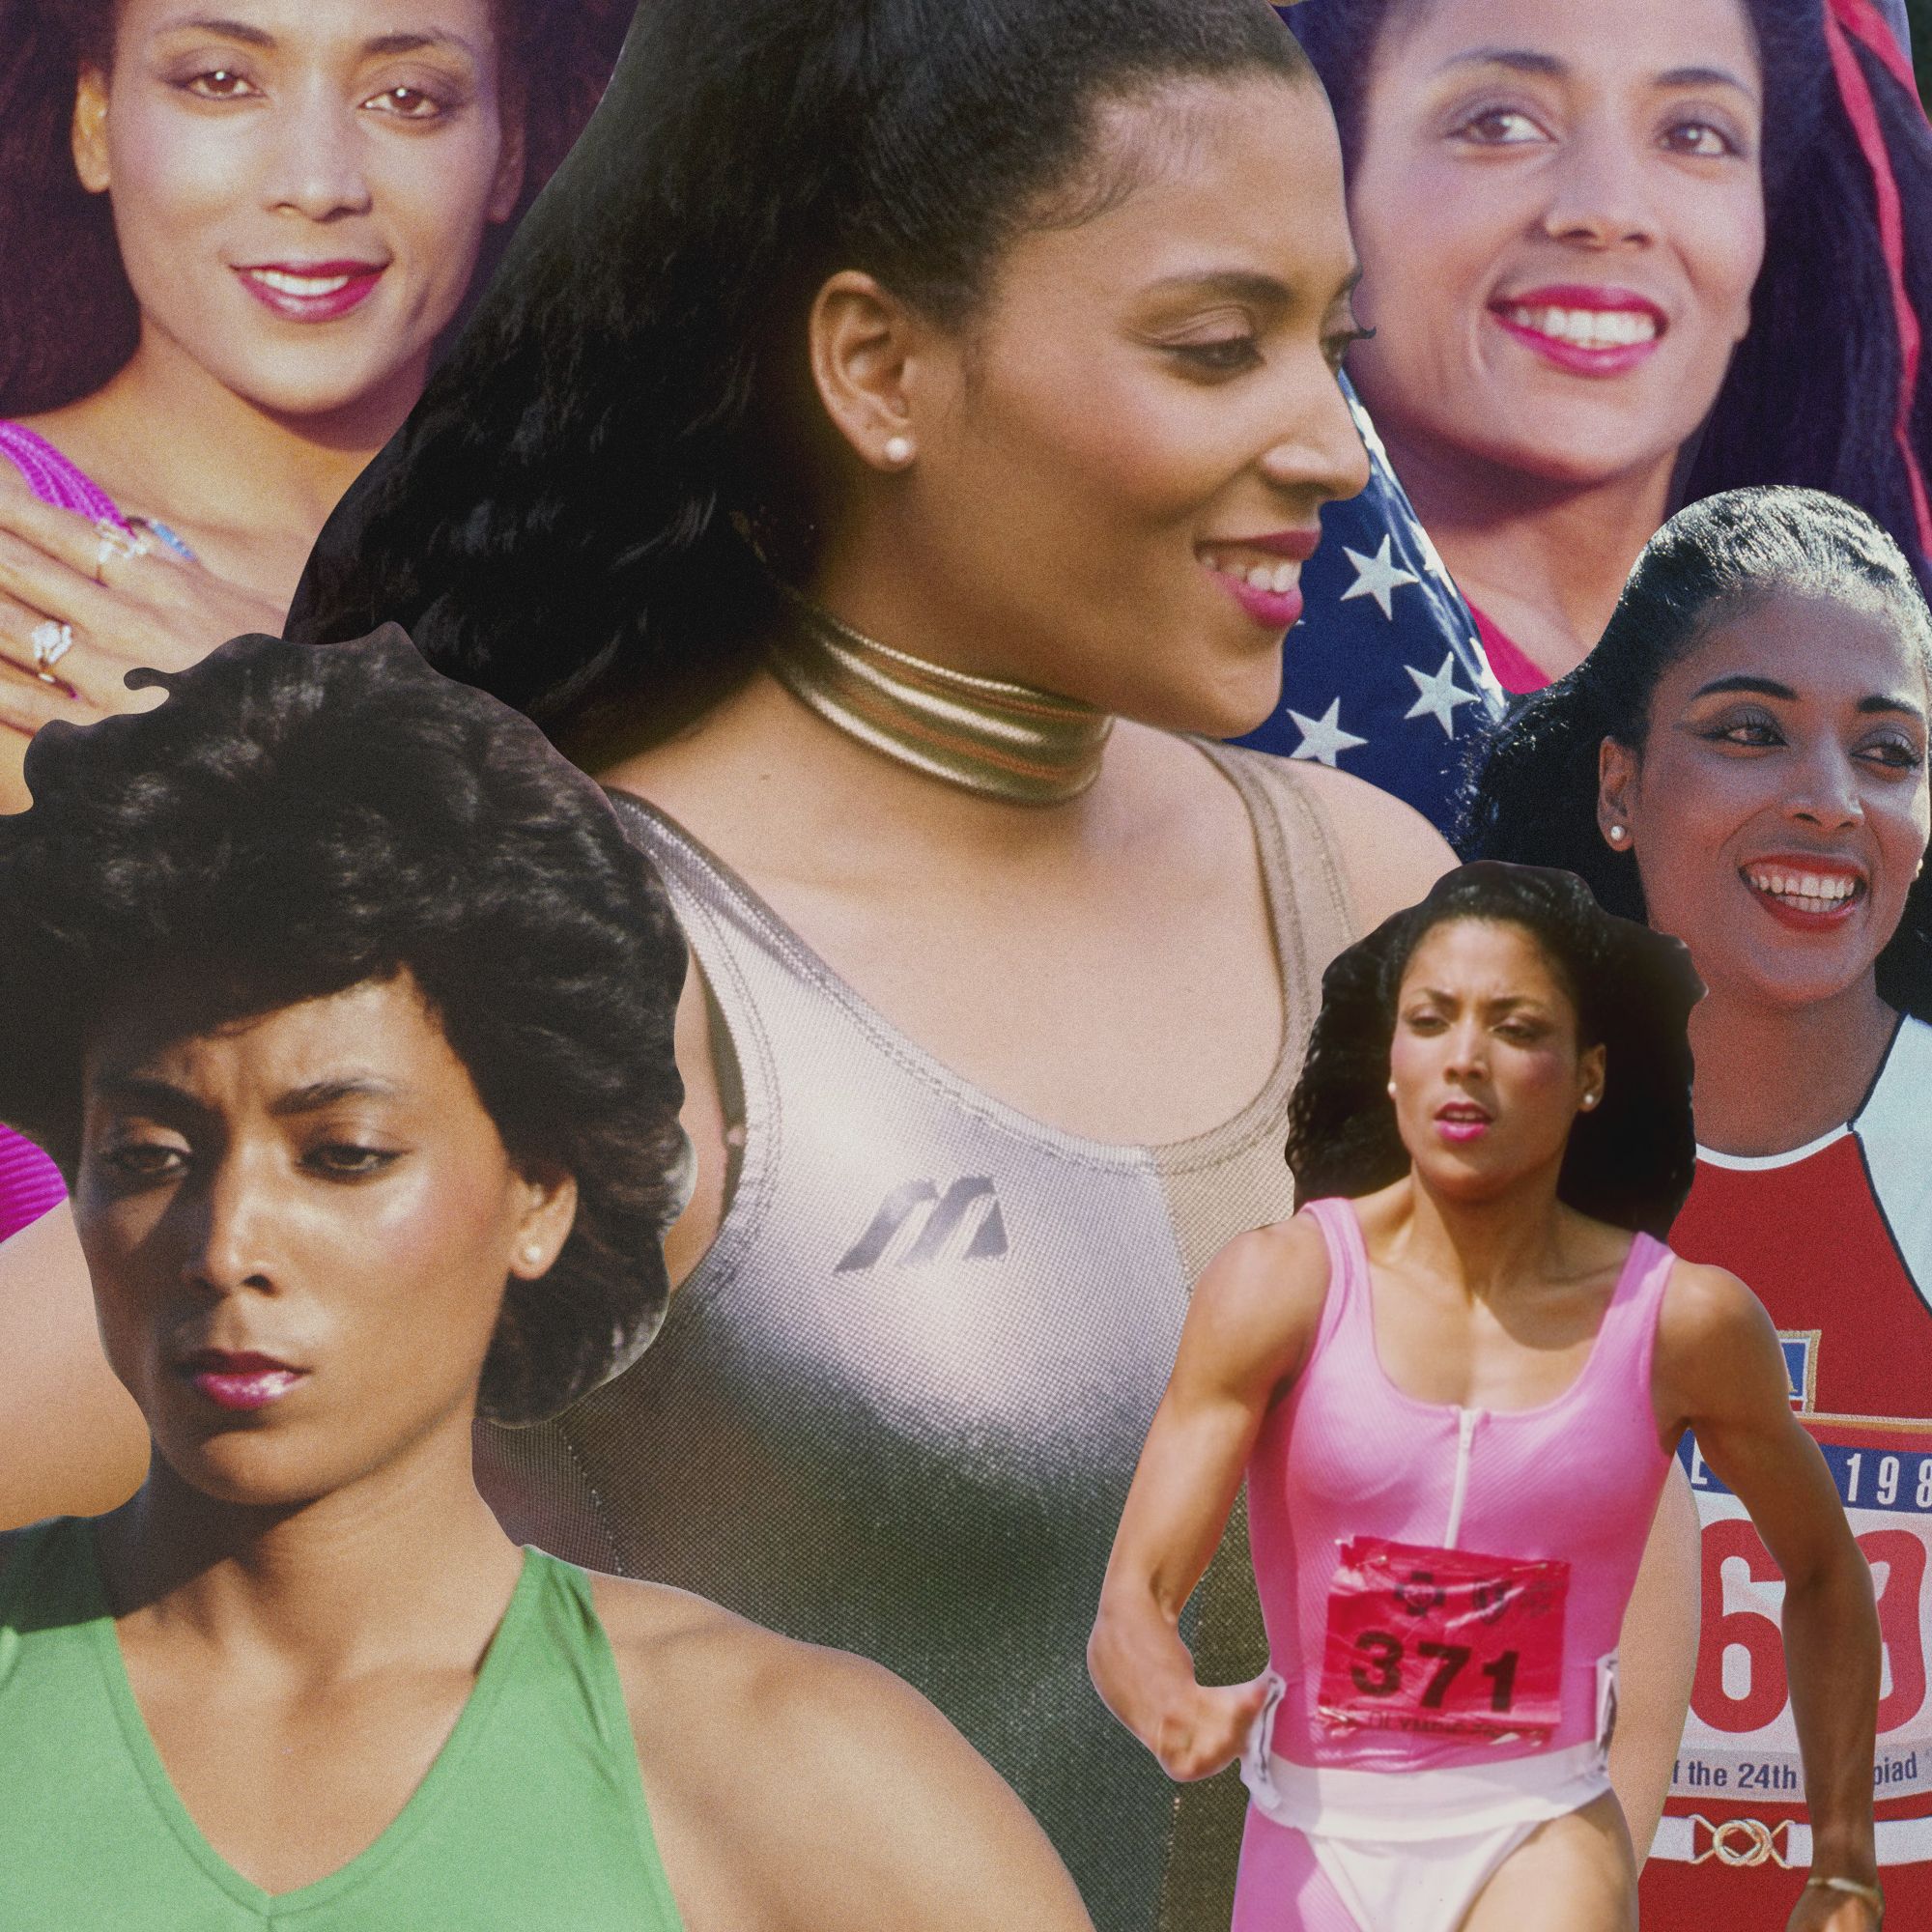 The Story Behind the Flo-Jo's